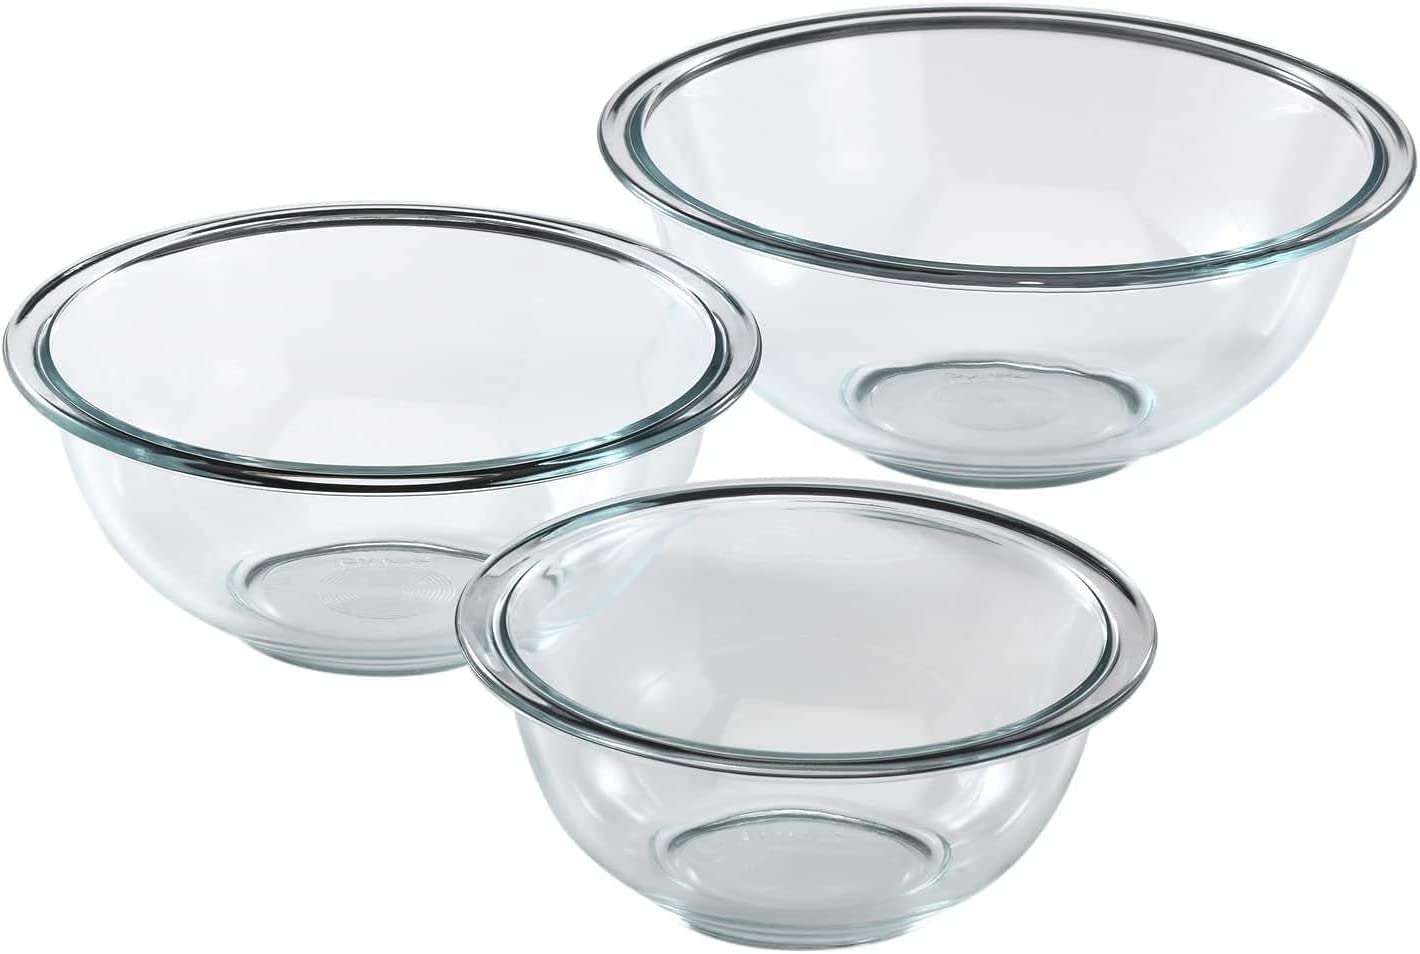 Pyrex 3 Piece Glass Mixing Bowl Set with 1, 1.5, 2.5 Quart Mixing Bowls for Kitchen, Baking, and Storage, Microwave, Freezer, and Dishwasher Safe ,…